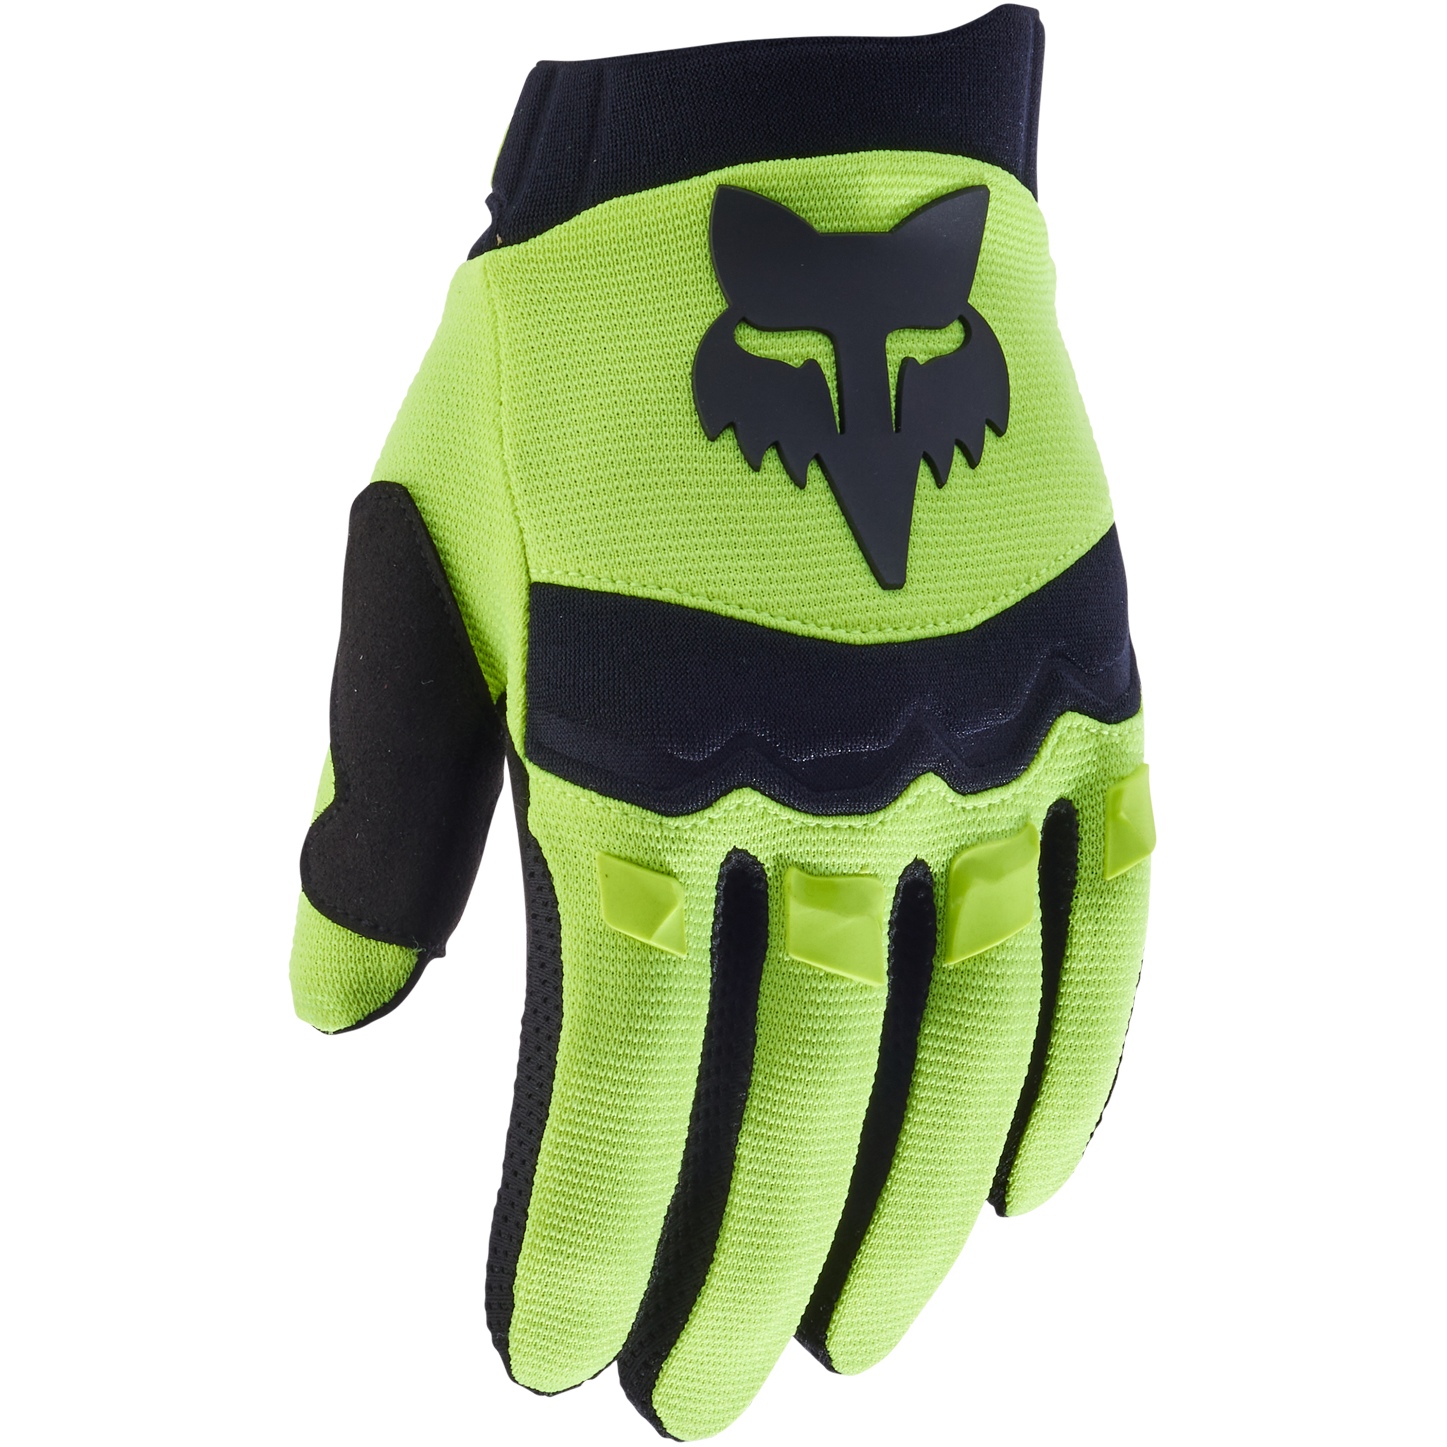 Picture of FOX Dirtpaw MTB Fullfinger Glove Youth - fluorescent yellow